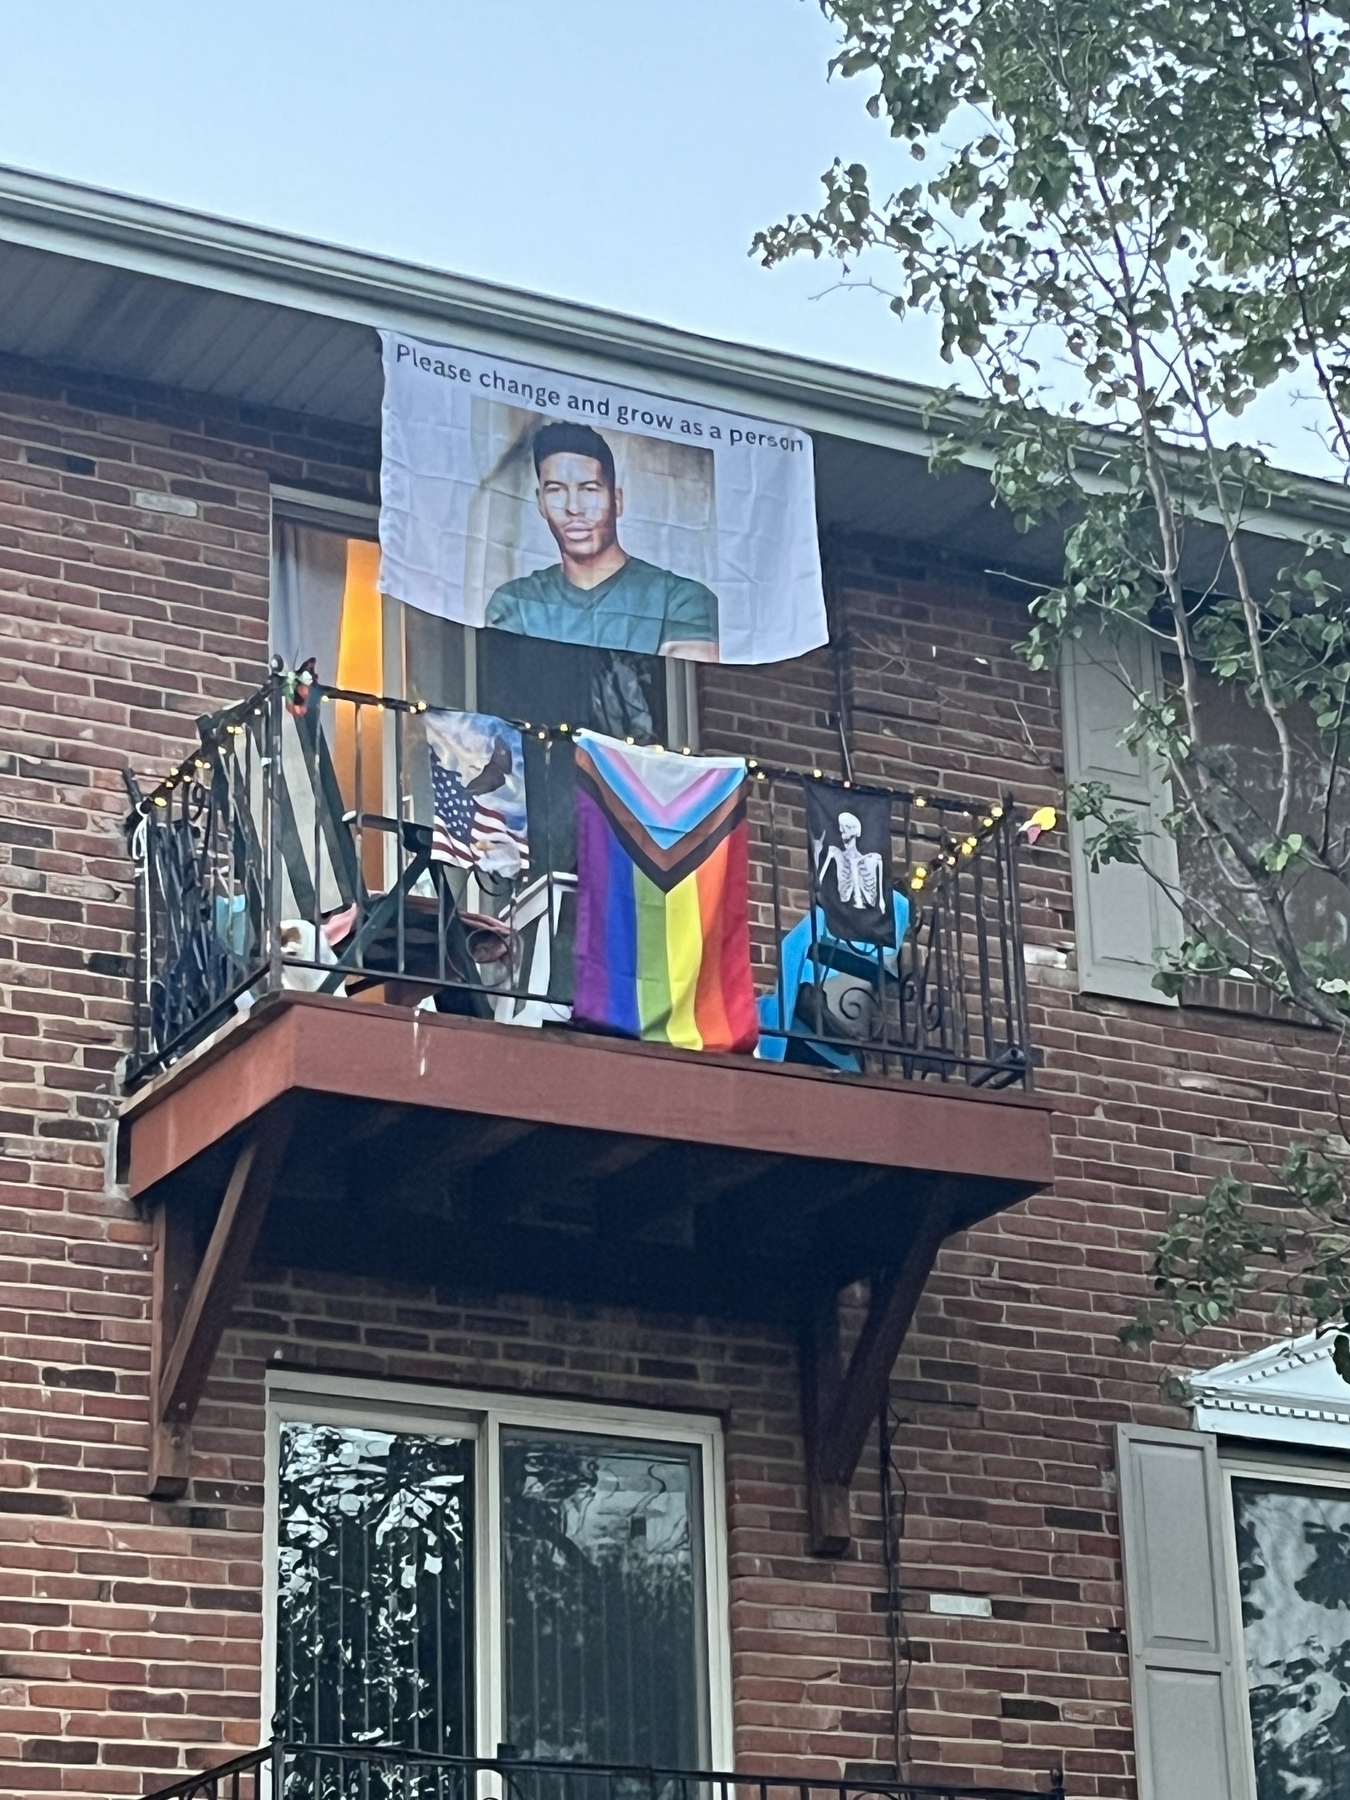  A brick apartment building with a Balcony with four flags - pride, skeleton rocker, America eagle, and a man saying please change and grow as a person